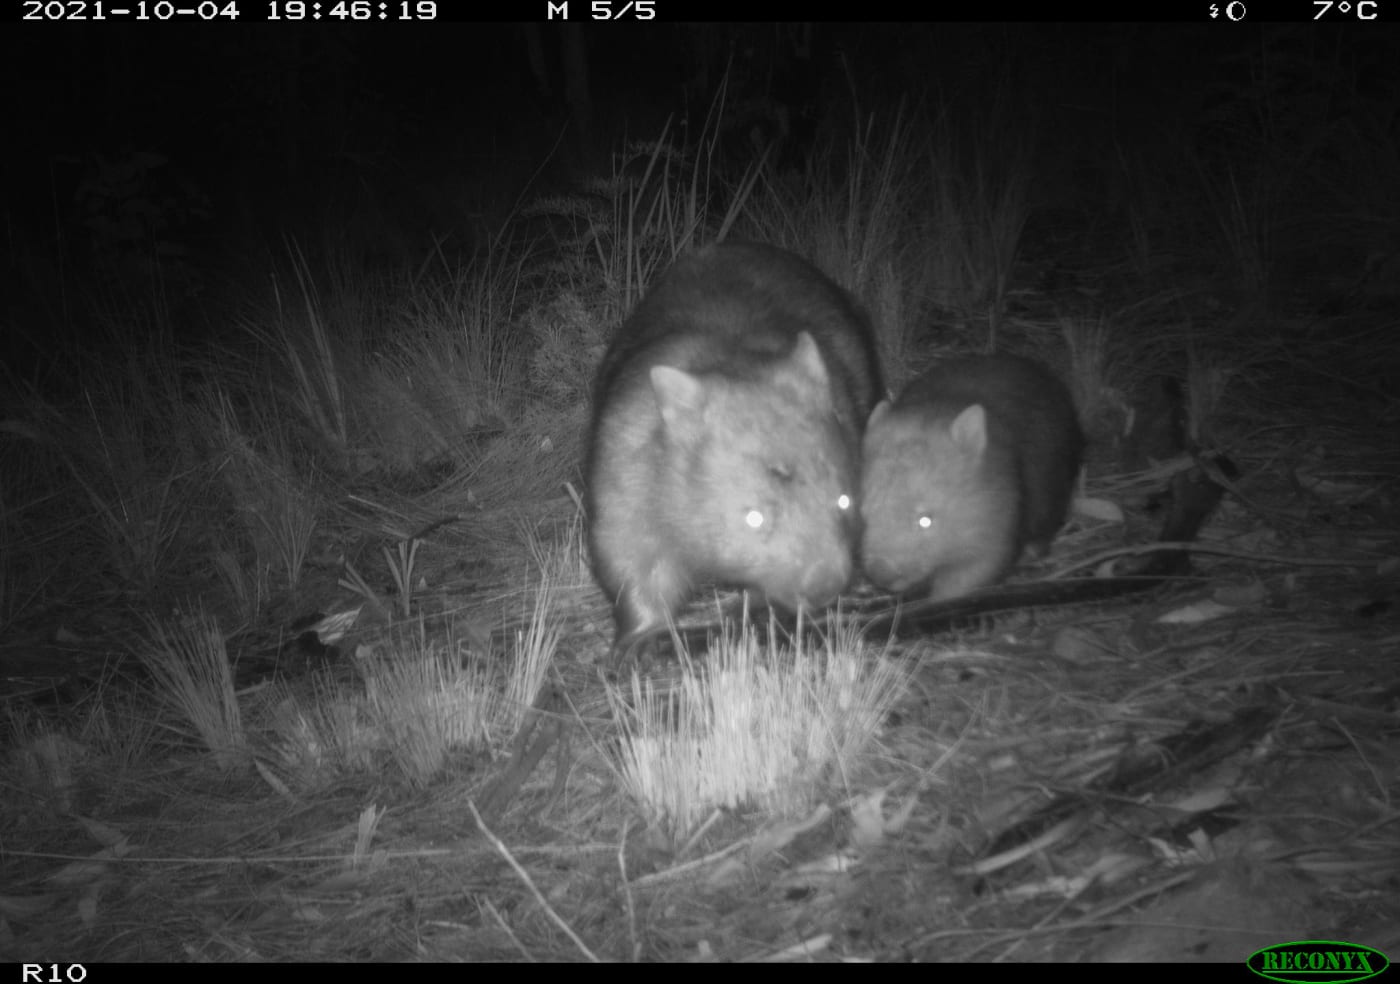 Mother and baby wombat captured in a photo from a camera trap